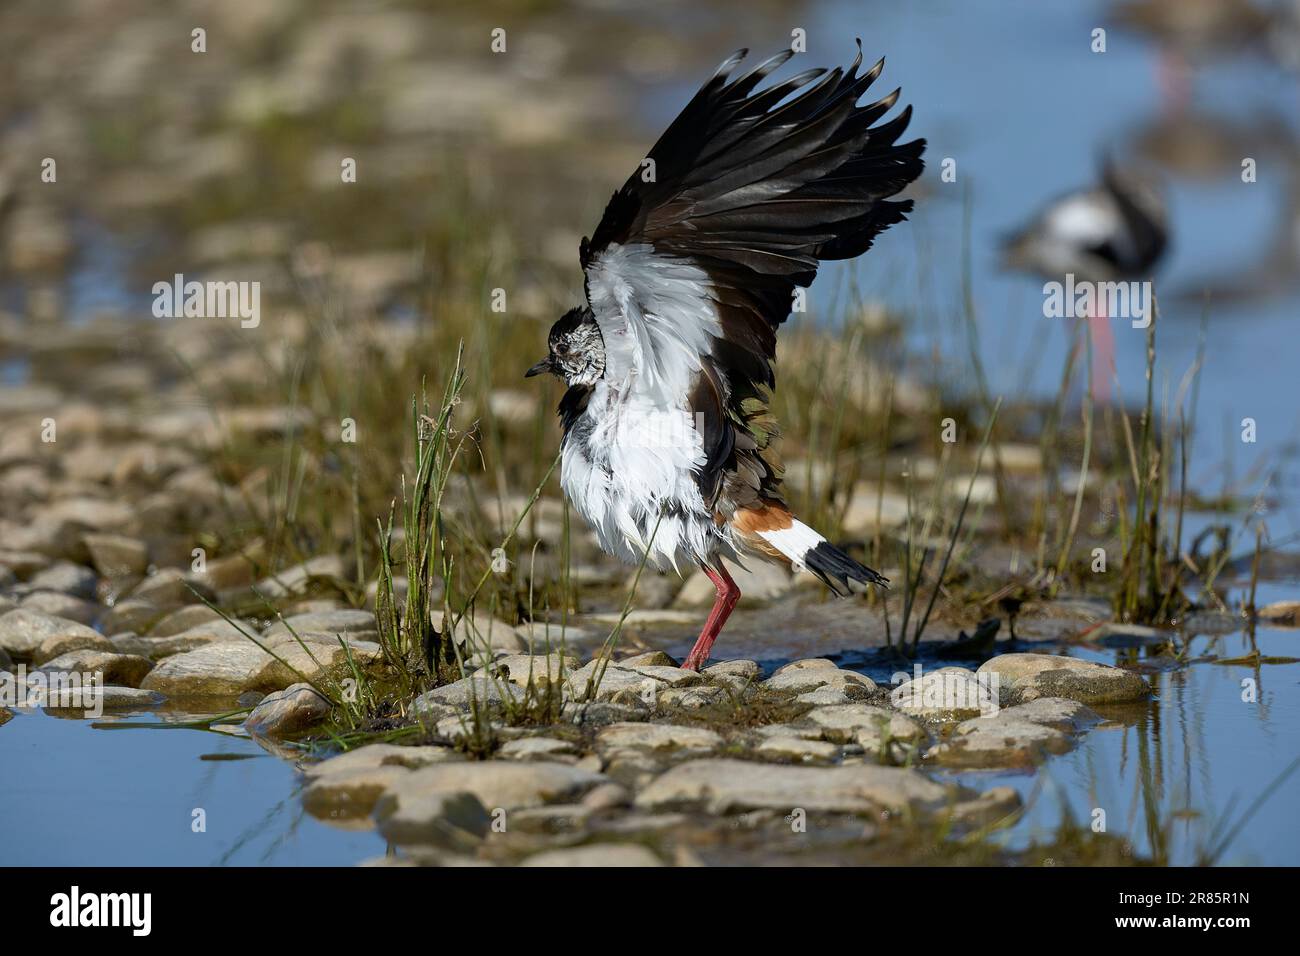 Lapwing taking off after bathing Stock Photo